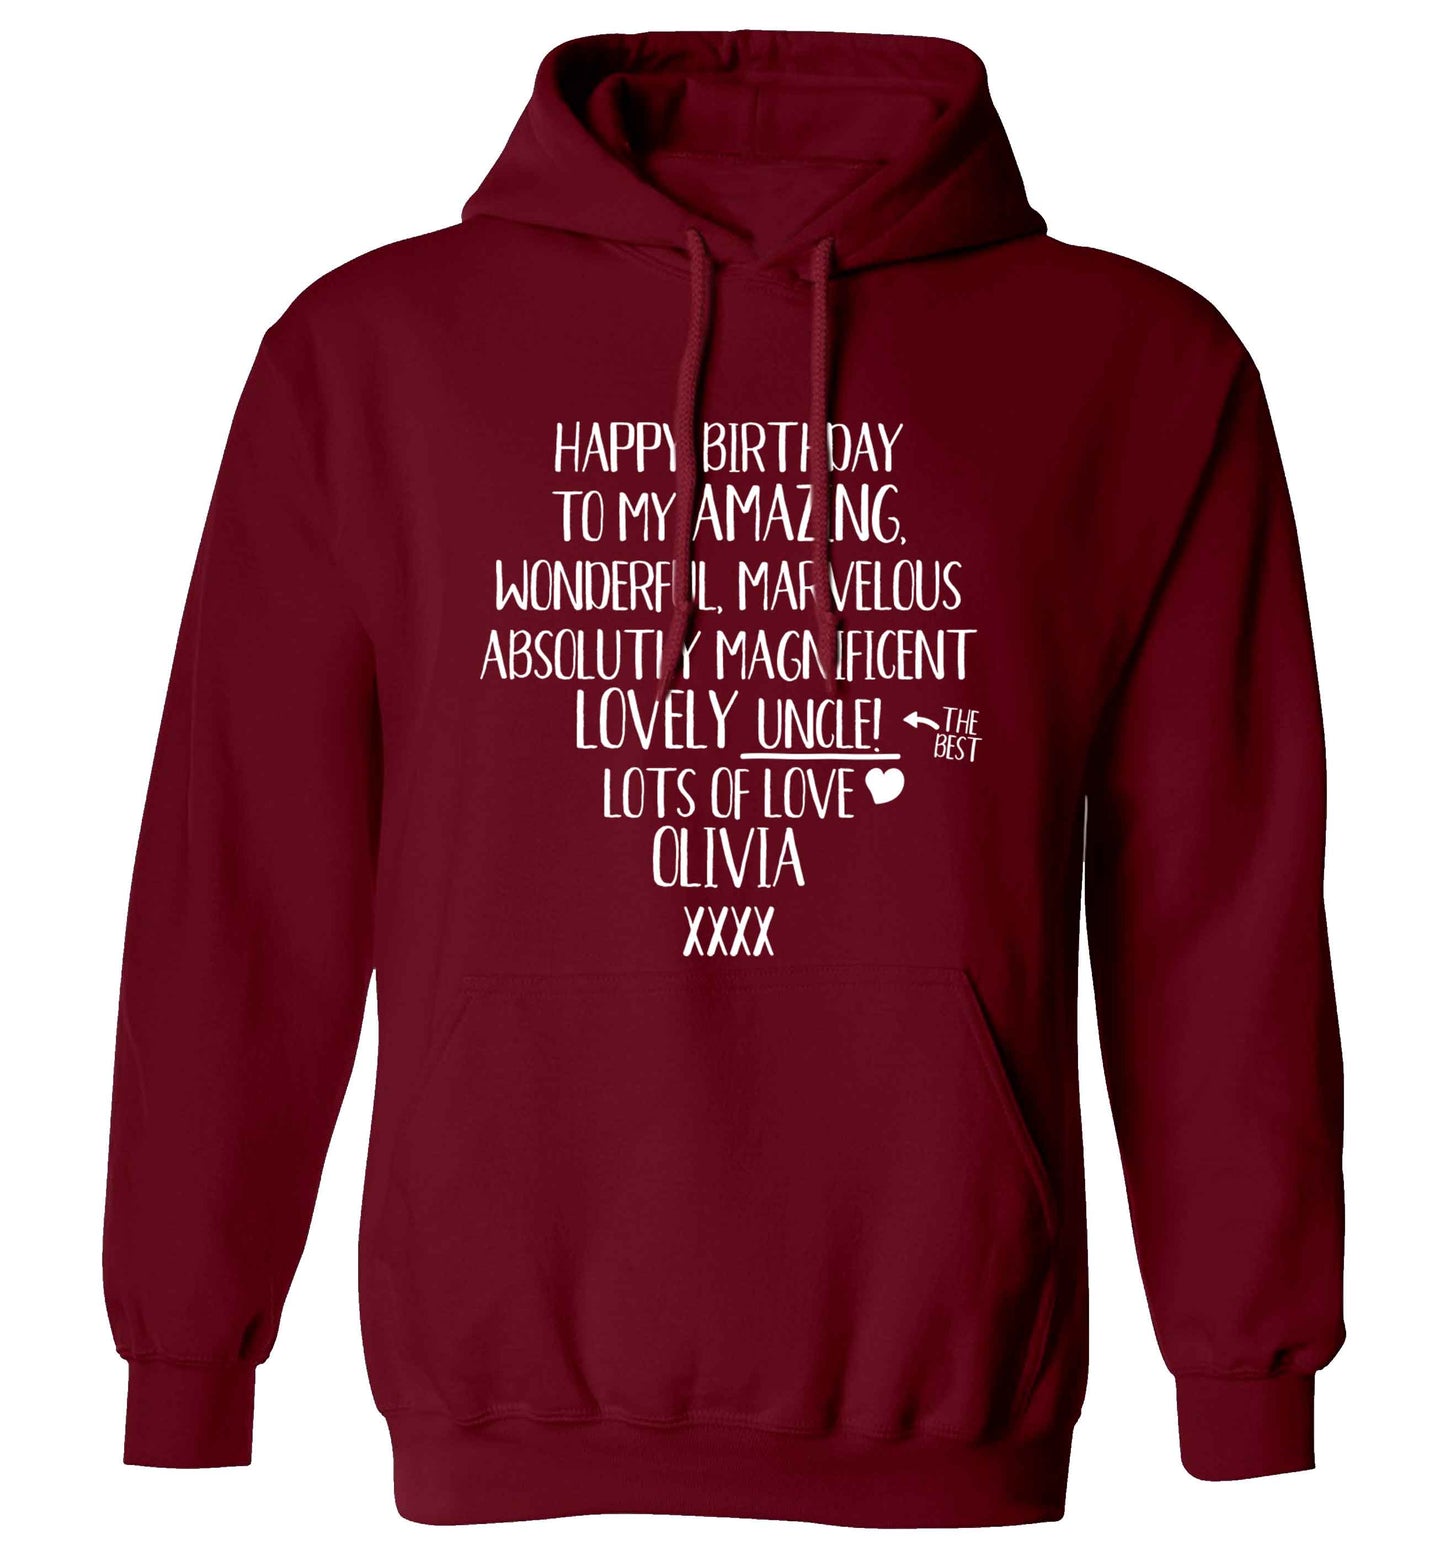 Personalised happy birthday to my amazing, wonderful, lovely uncle adults unisex maroon hoodie 2XL